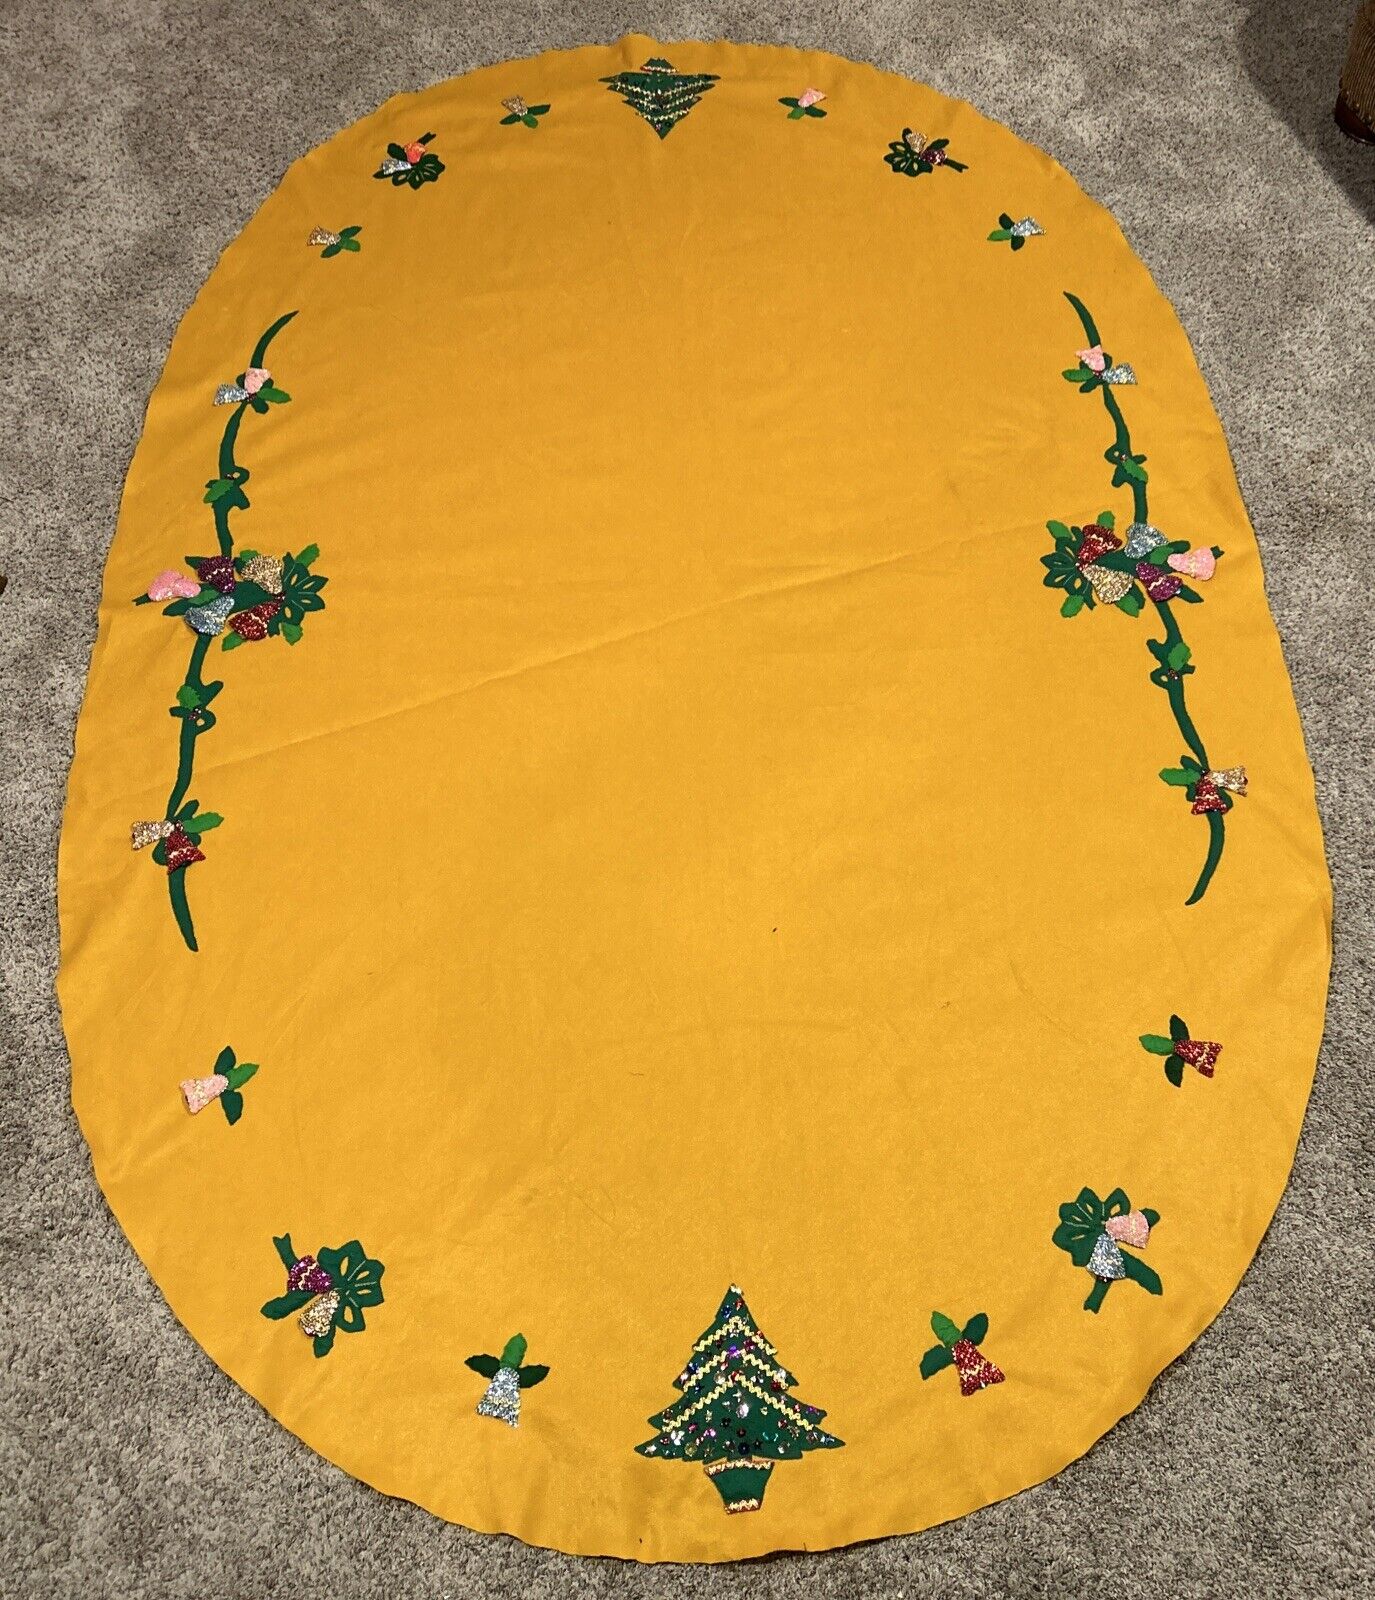 Vintage Sequins Felt Christmas Tree Fruit Tablecloth Hand Made **Exquisite**